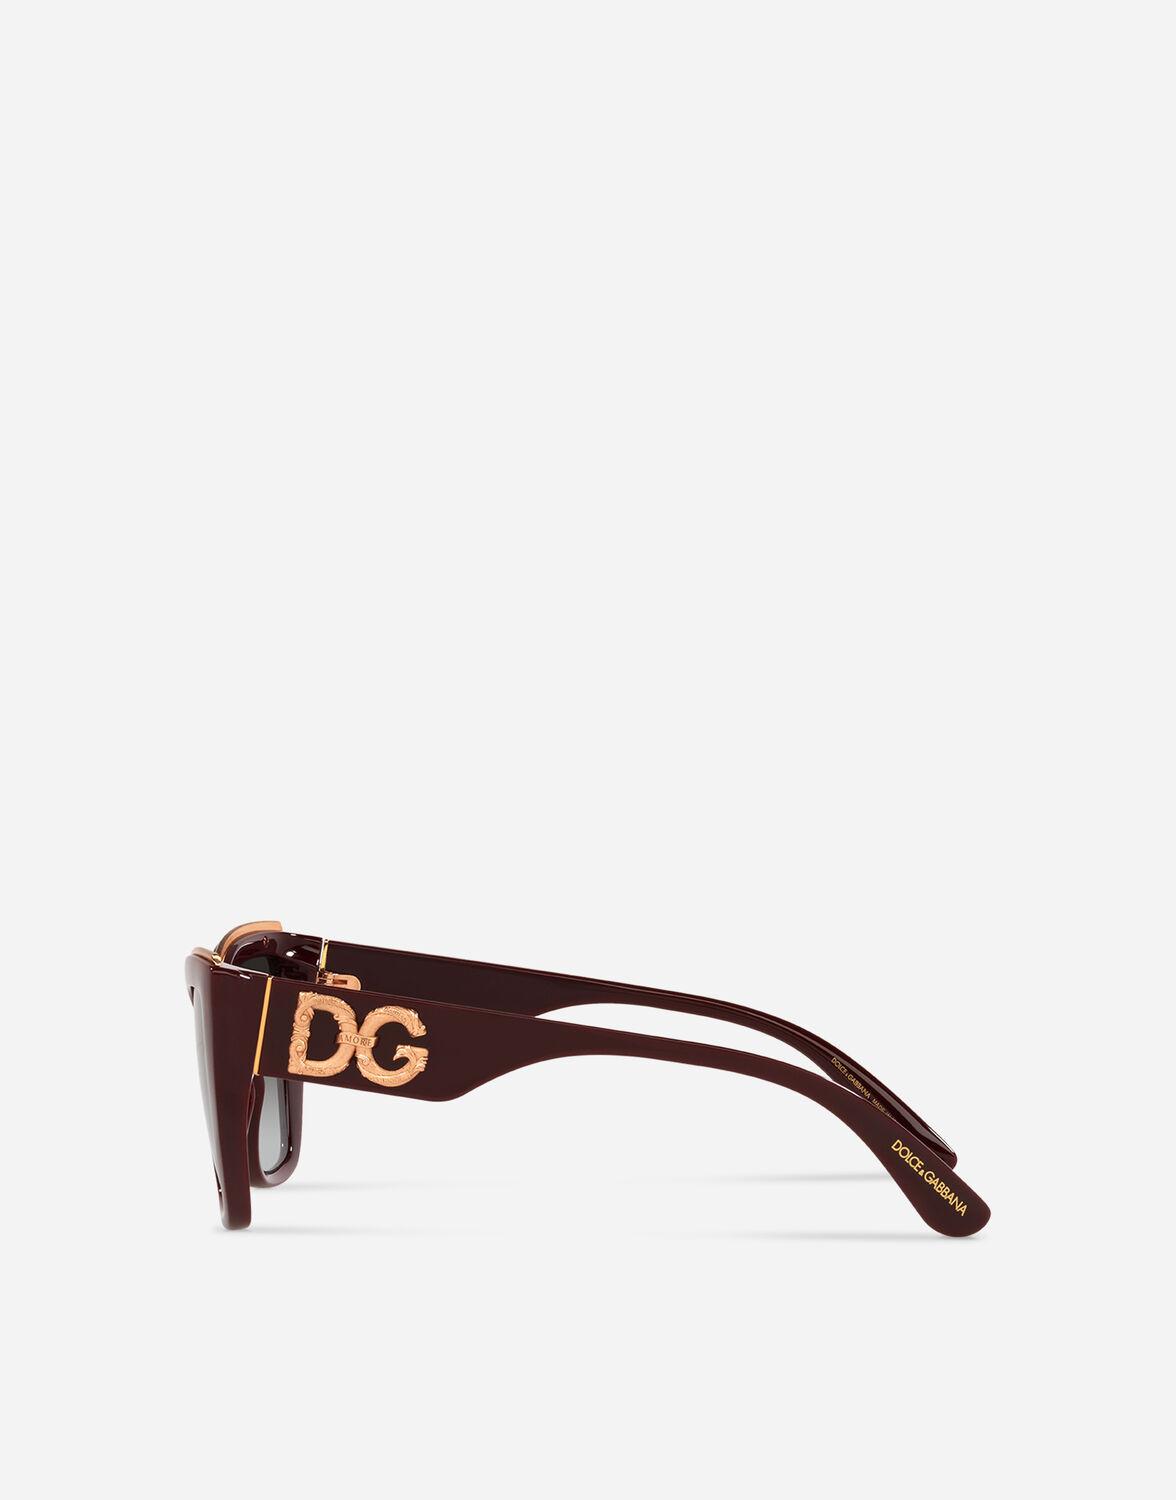 Dolce & Gabbana Synthetic Dg Amore Sunglasses in Brown - Lyst